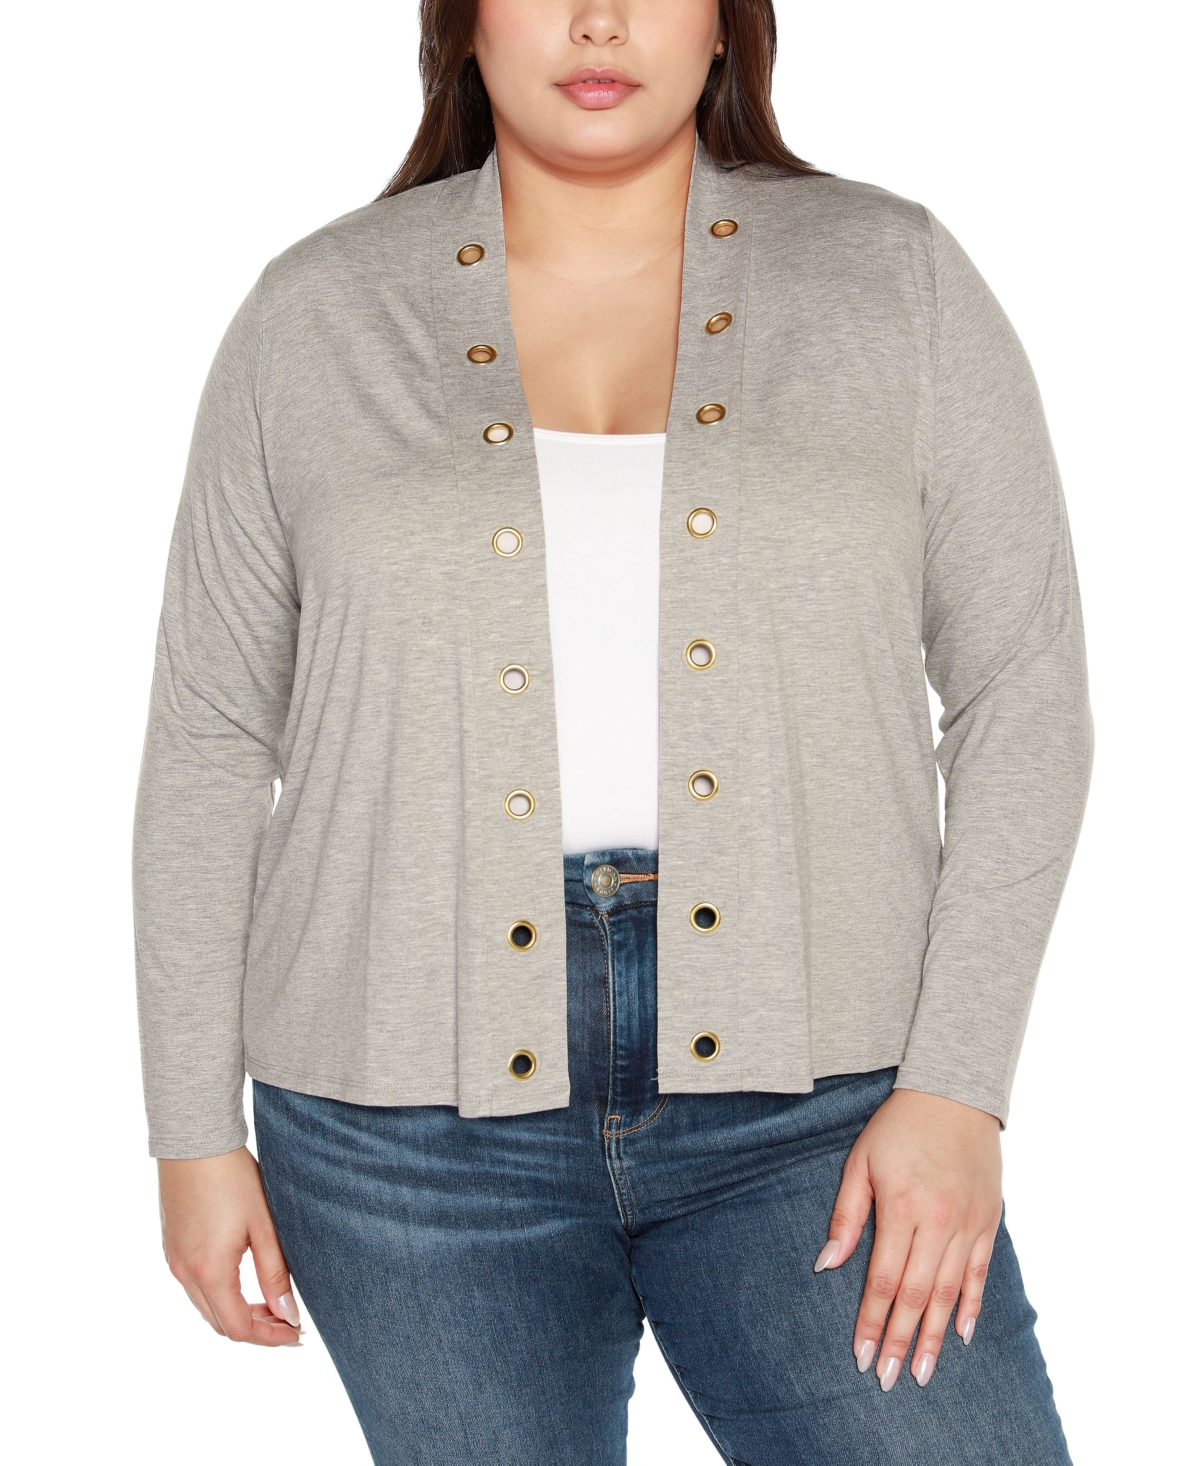 Plus Size Grommet Detail Cropped Knit Cardigan Sweater - Heather Grey